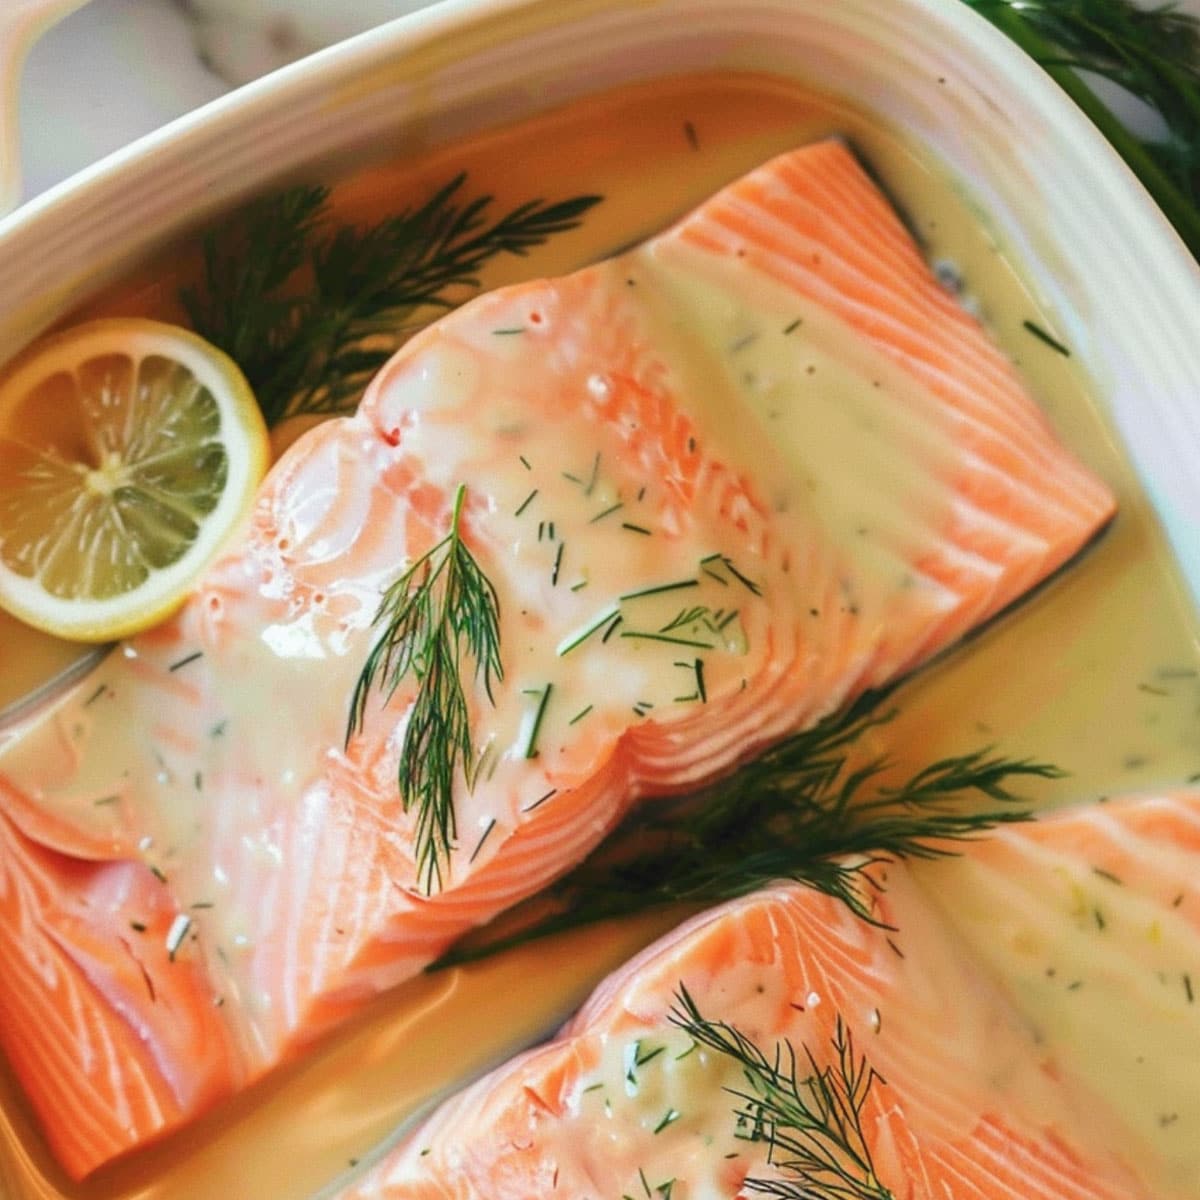 Poached salmon on a plate with lemon and herbs, highlighting the vibrant colors and textures of the finished dish.